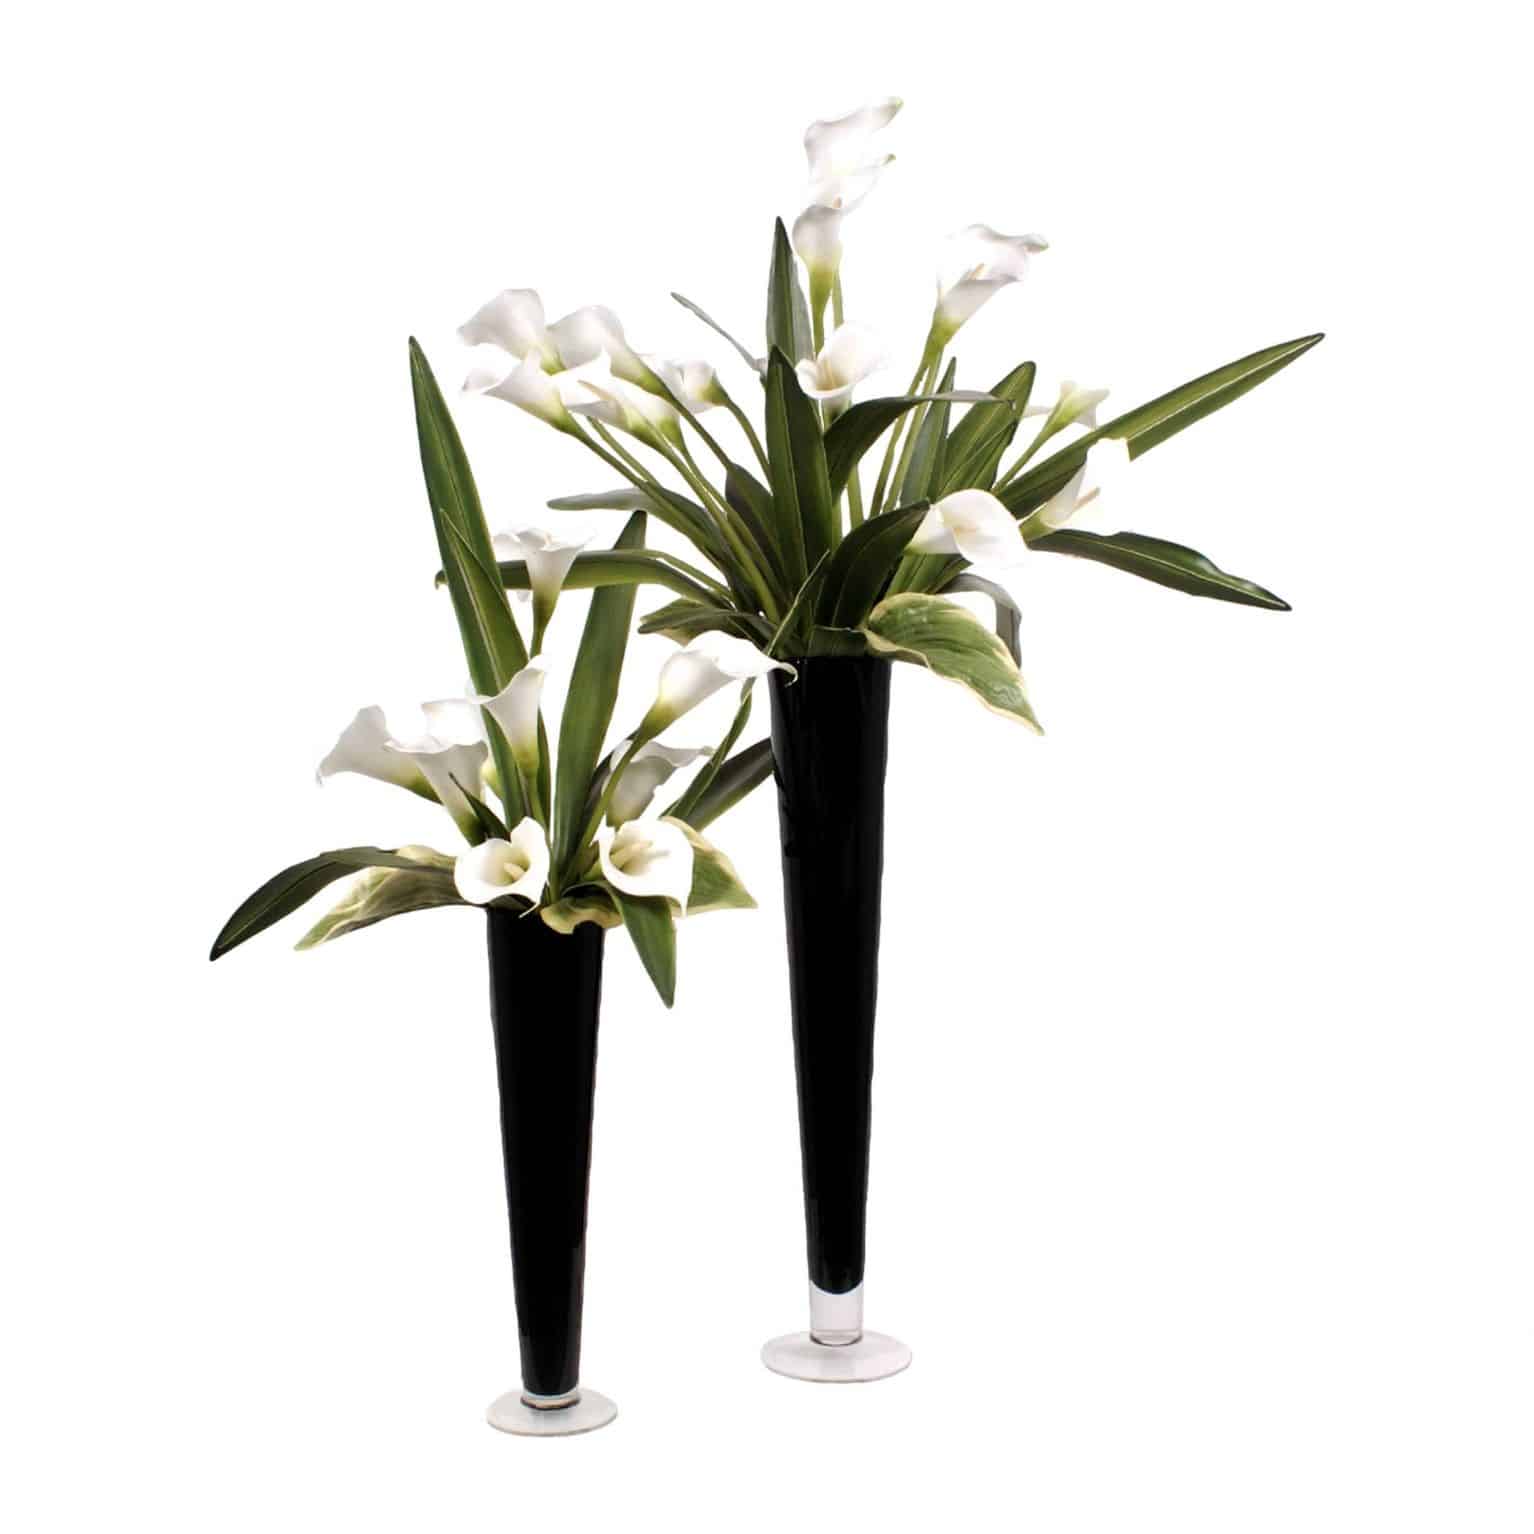 Buy our pair of flawless faux classic white lilies in tall black vases. Natural looking